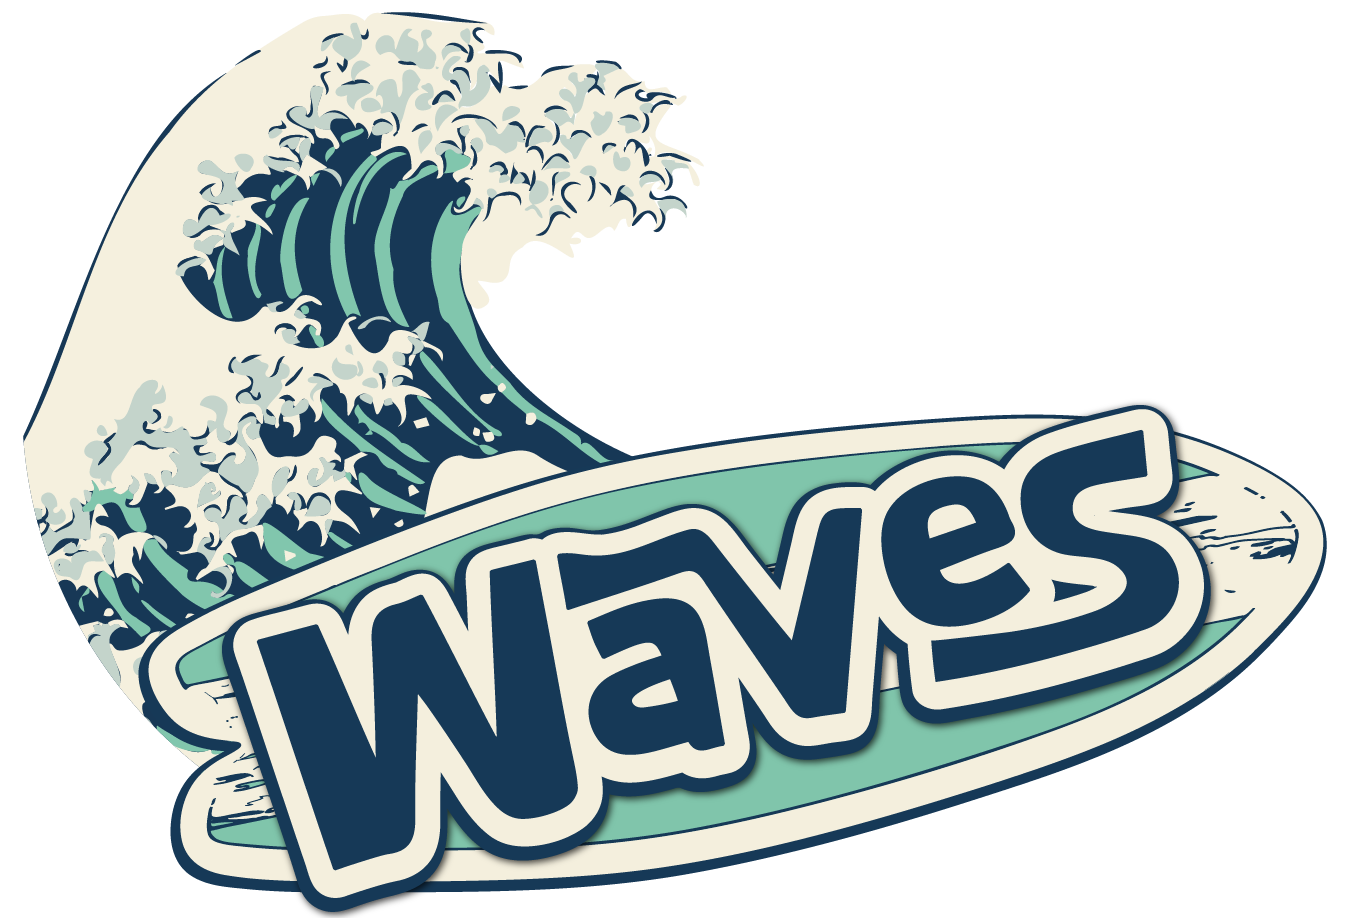 WAVES CAR WASH LOGO - VINTAGE SURFBOARD WITH THE WORD WAVES CAR WASH ON TOP AND A WAVE BEHIND